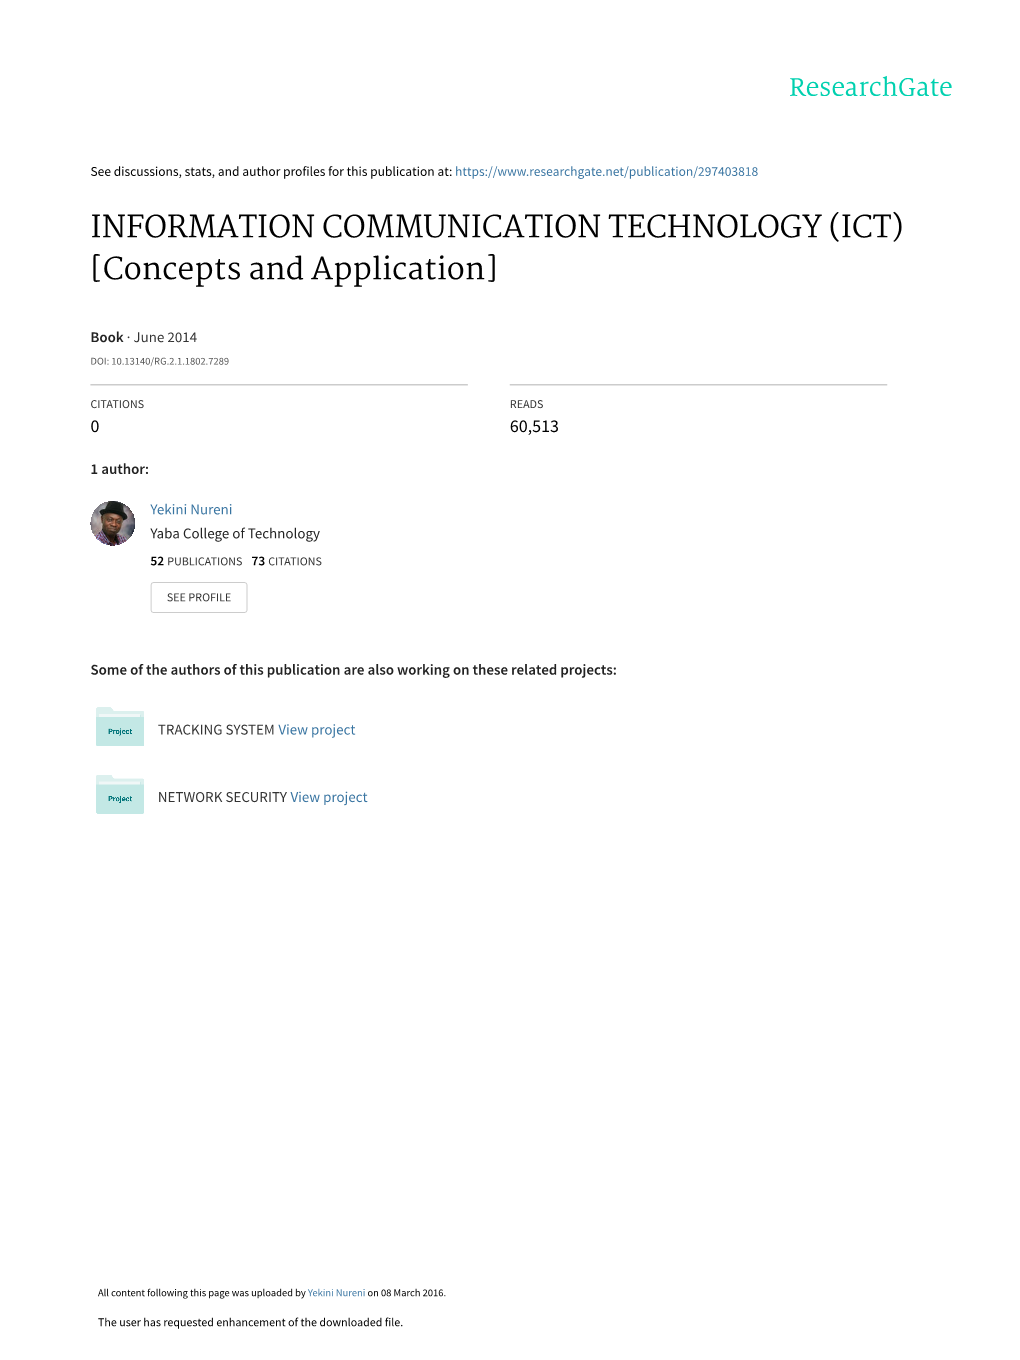 INFORMATION COMMUNICATION TECHNOLOGY (ICT) [Concepts and Application]